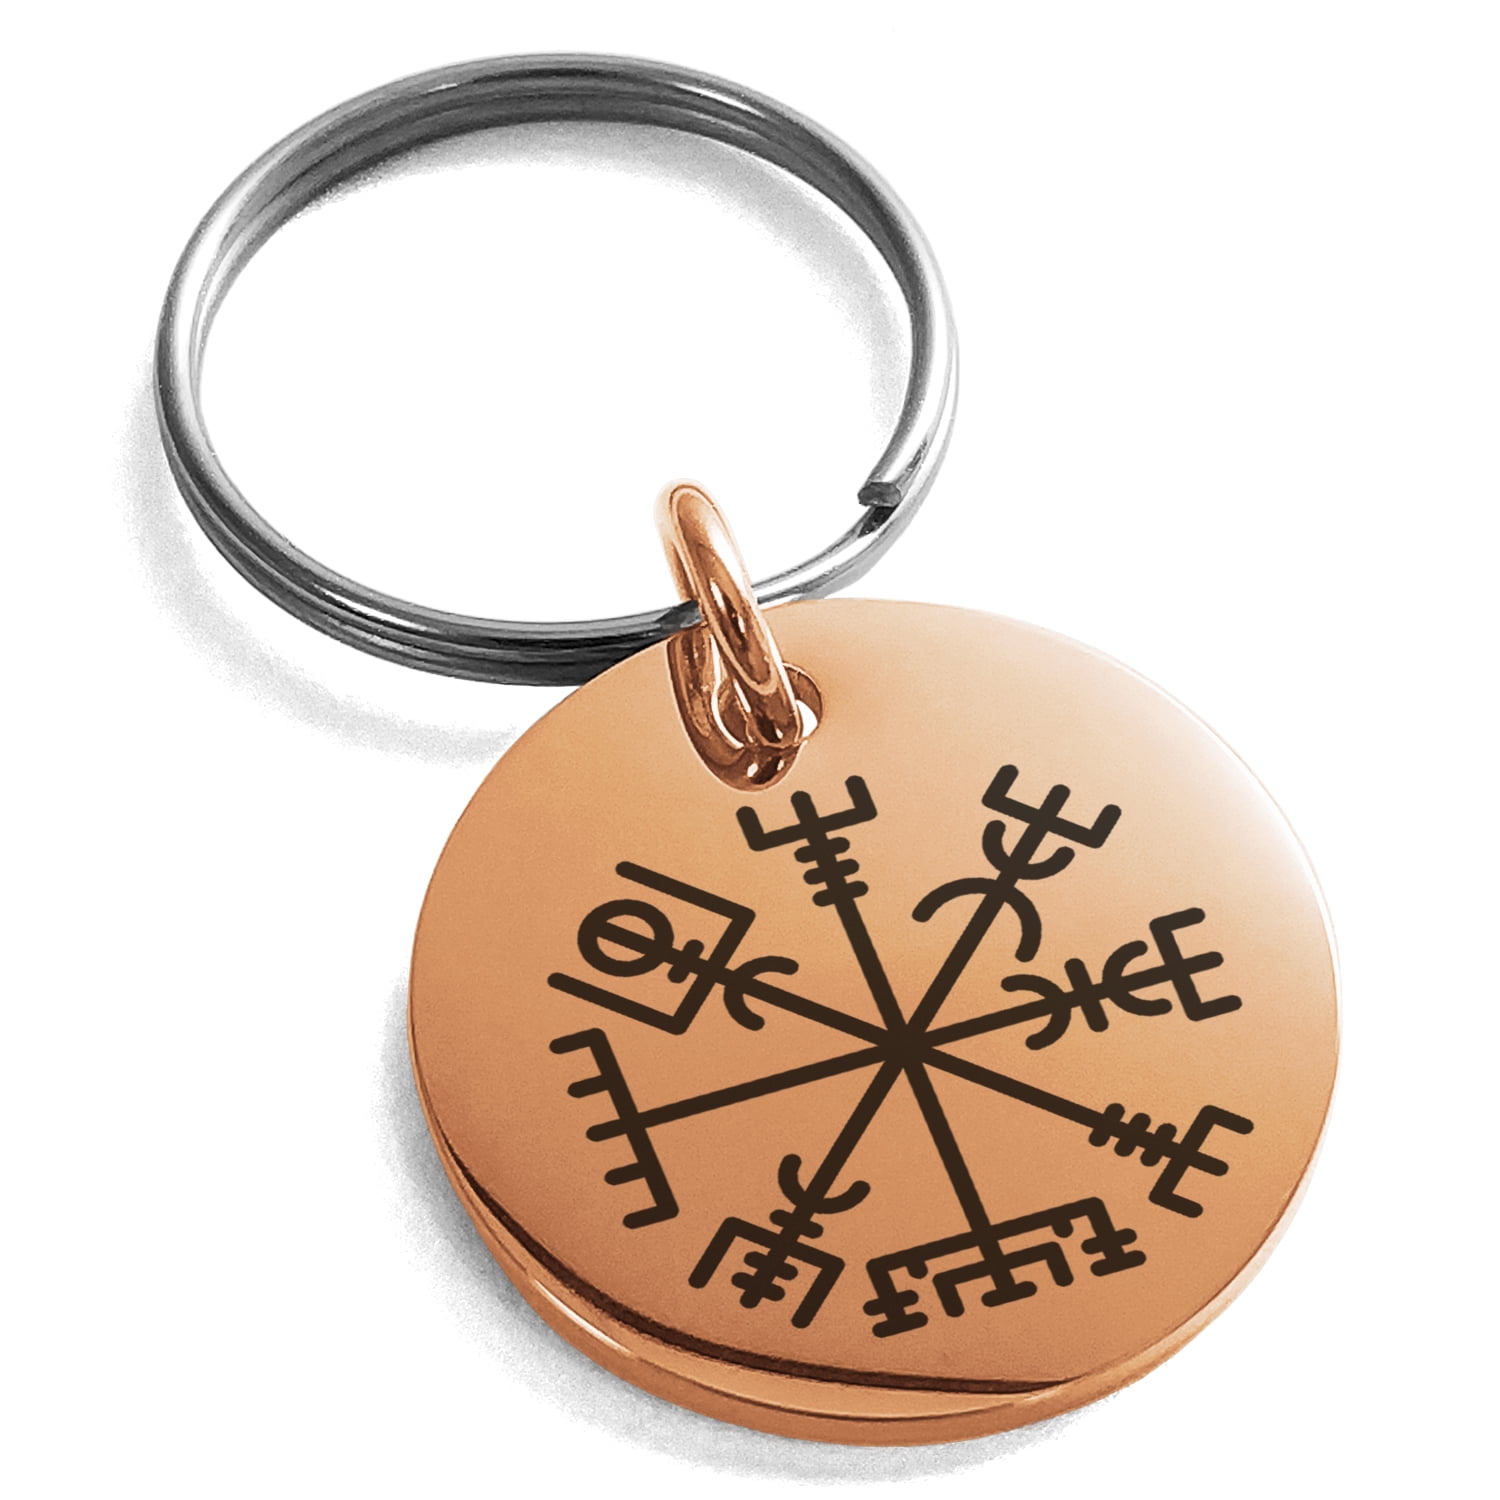 Accessories Keychains & Lanyards Zipper Charms vegvisir key ring charm protection Viking compass good luck gift safe travel 